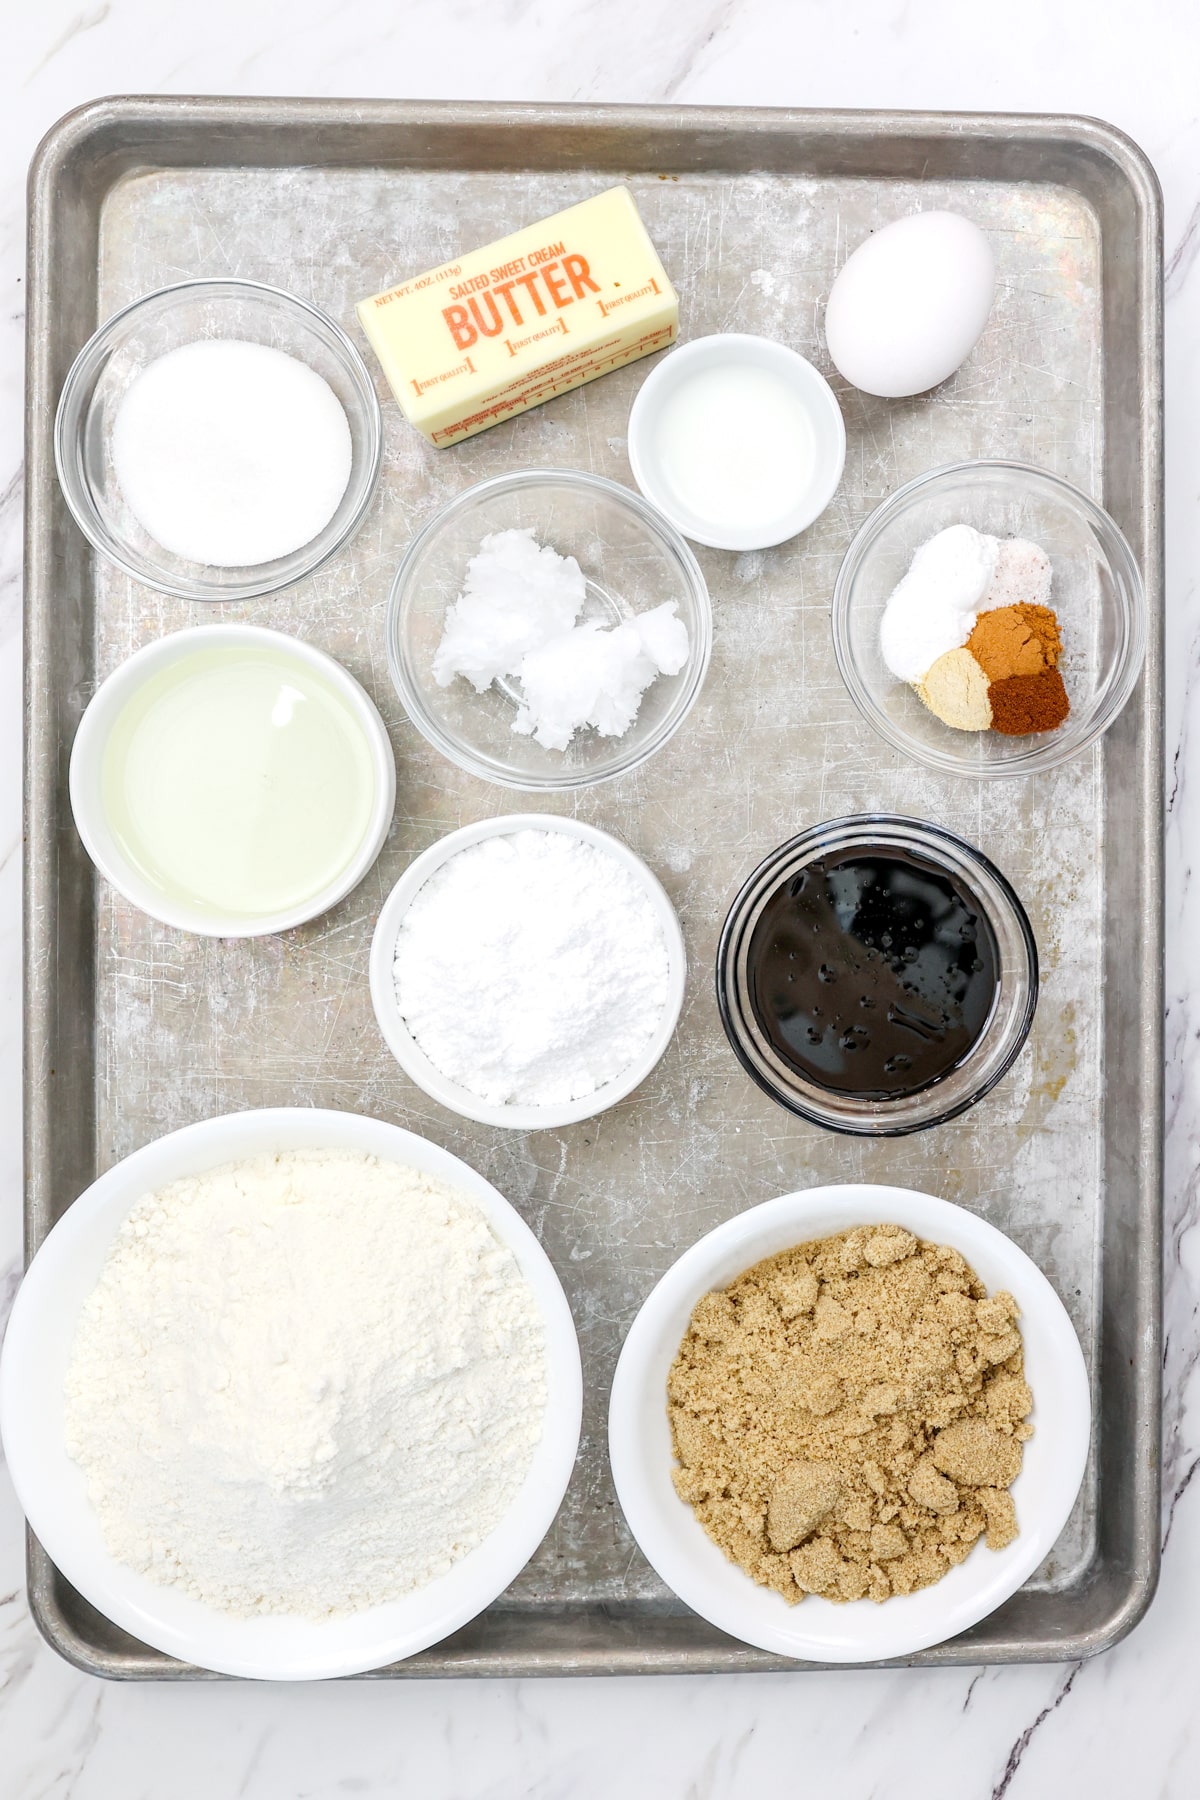 Top view of ingredients needed to make Gingerbread Sugar Cookies in small bowls on a baking tray.